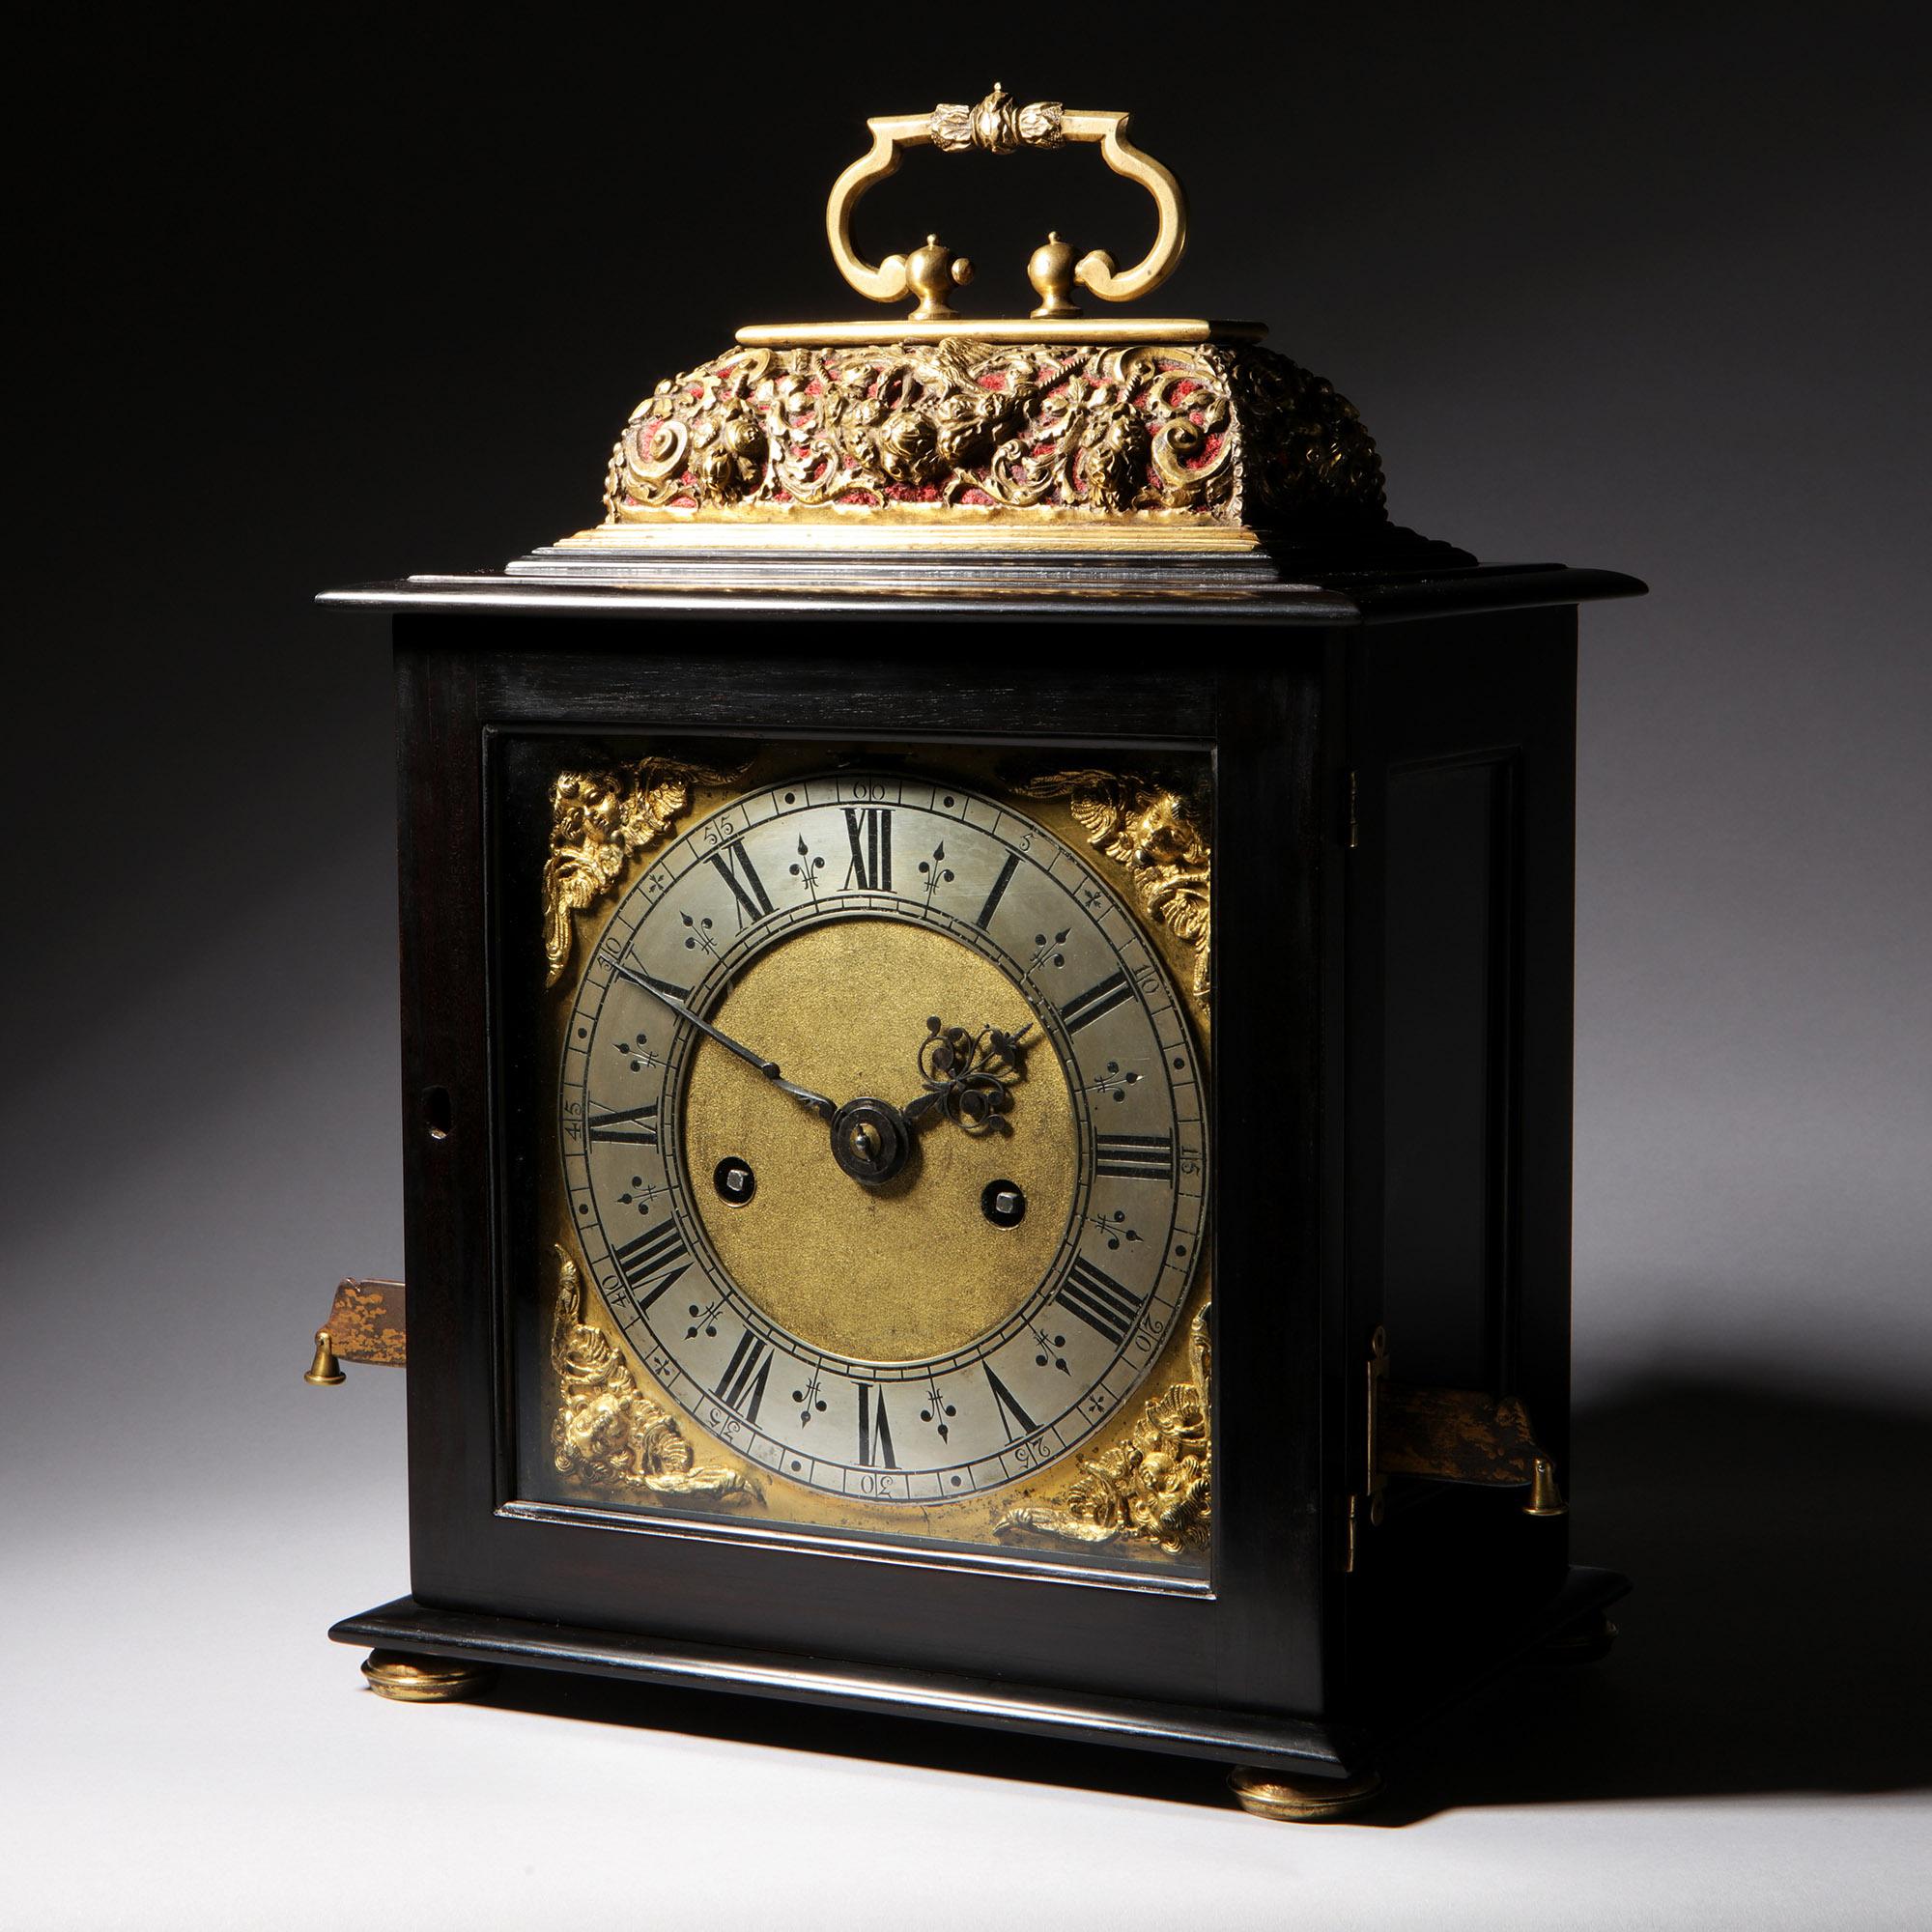 A Rare and Important Charles II 17th Century Table Clock by Henry Jones 2